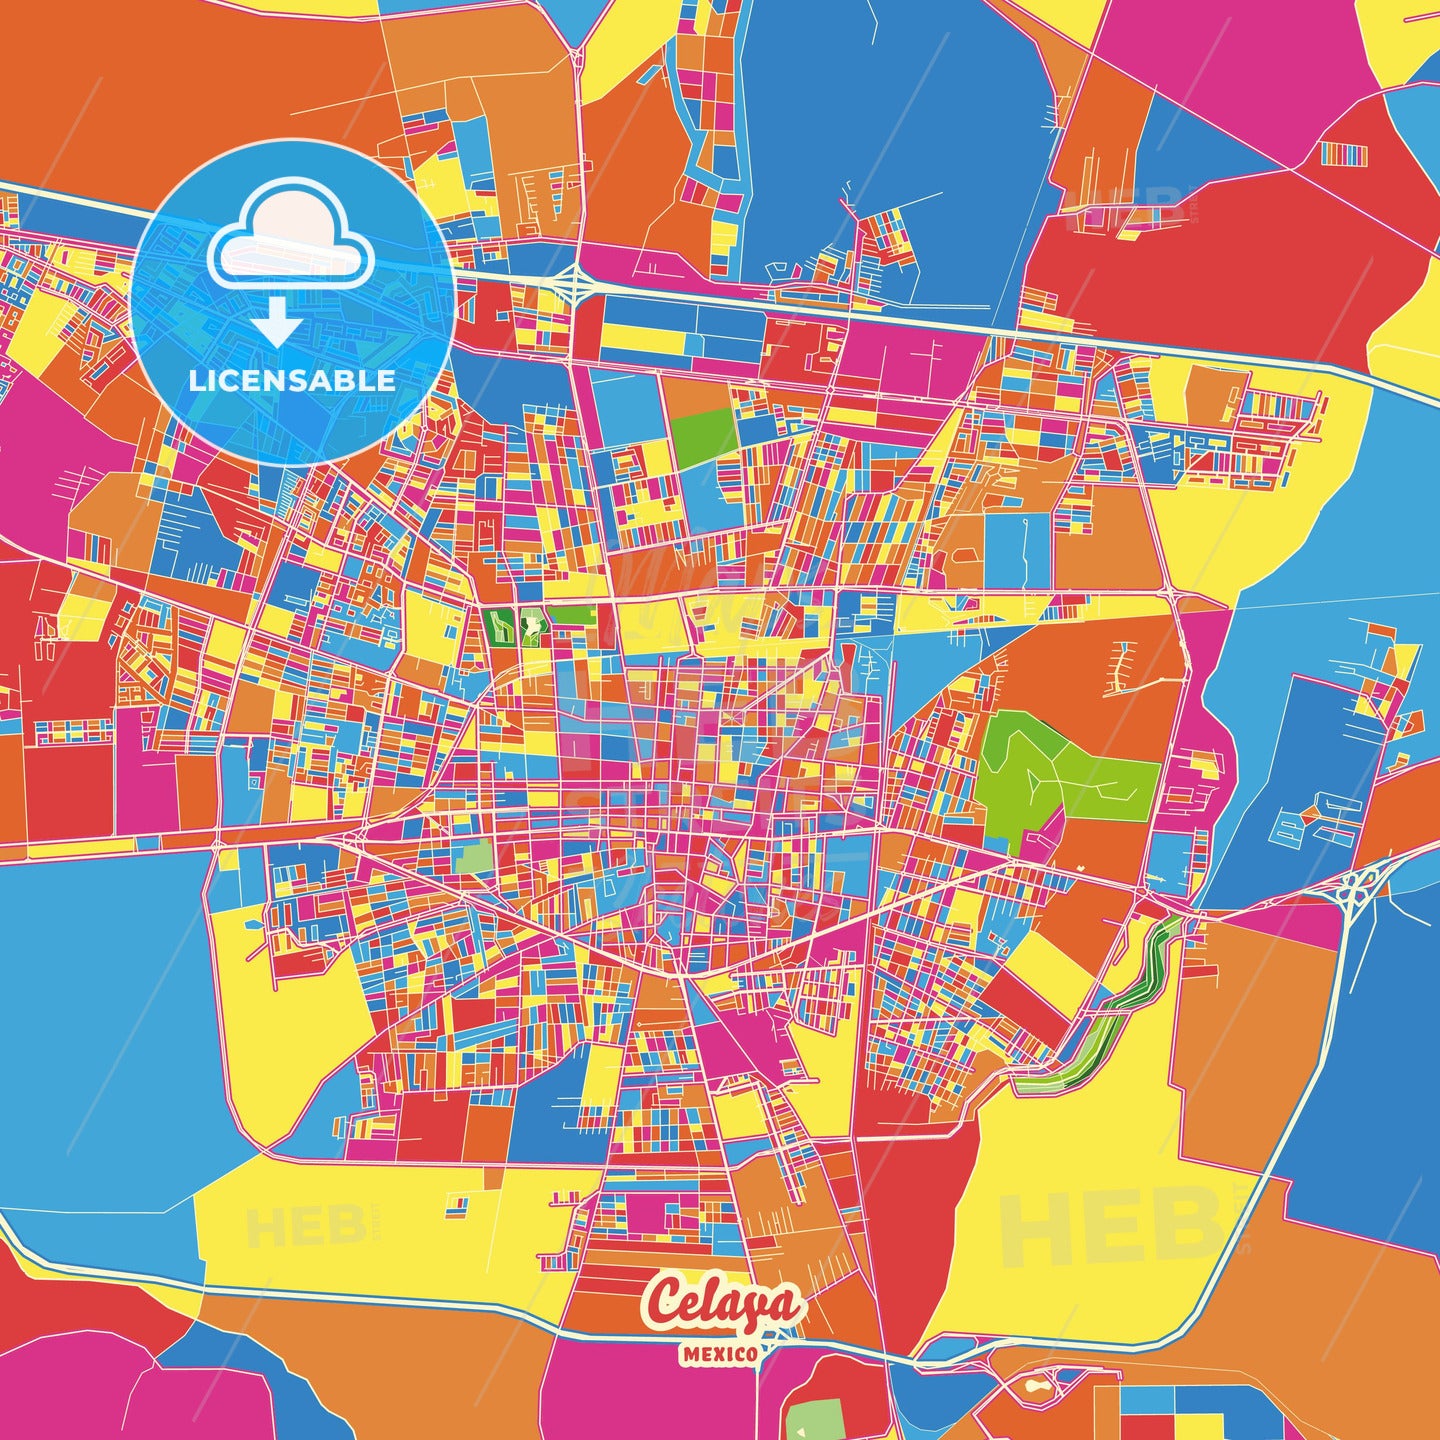 Celaya, Mexico Crazy Colorful Street Map Poster Template - HEBSTREITS Sketches